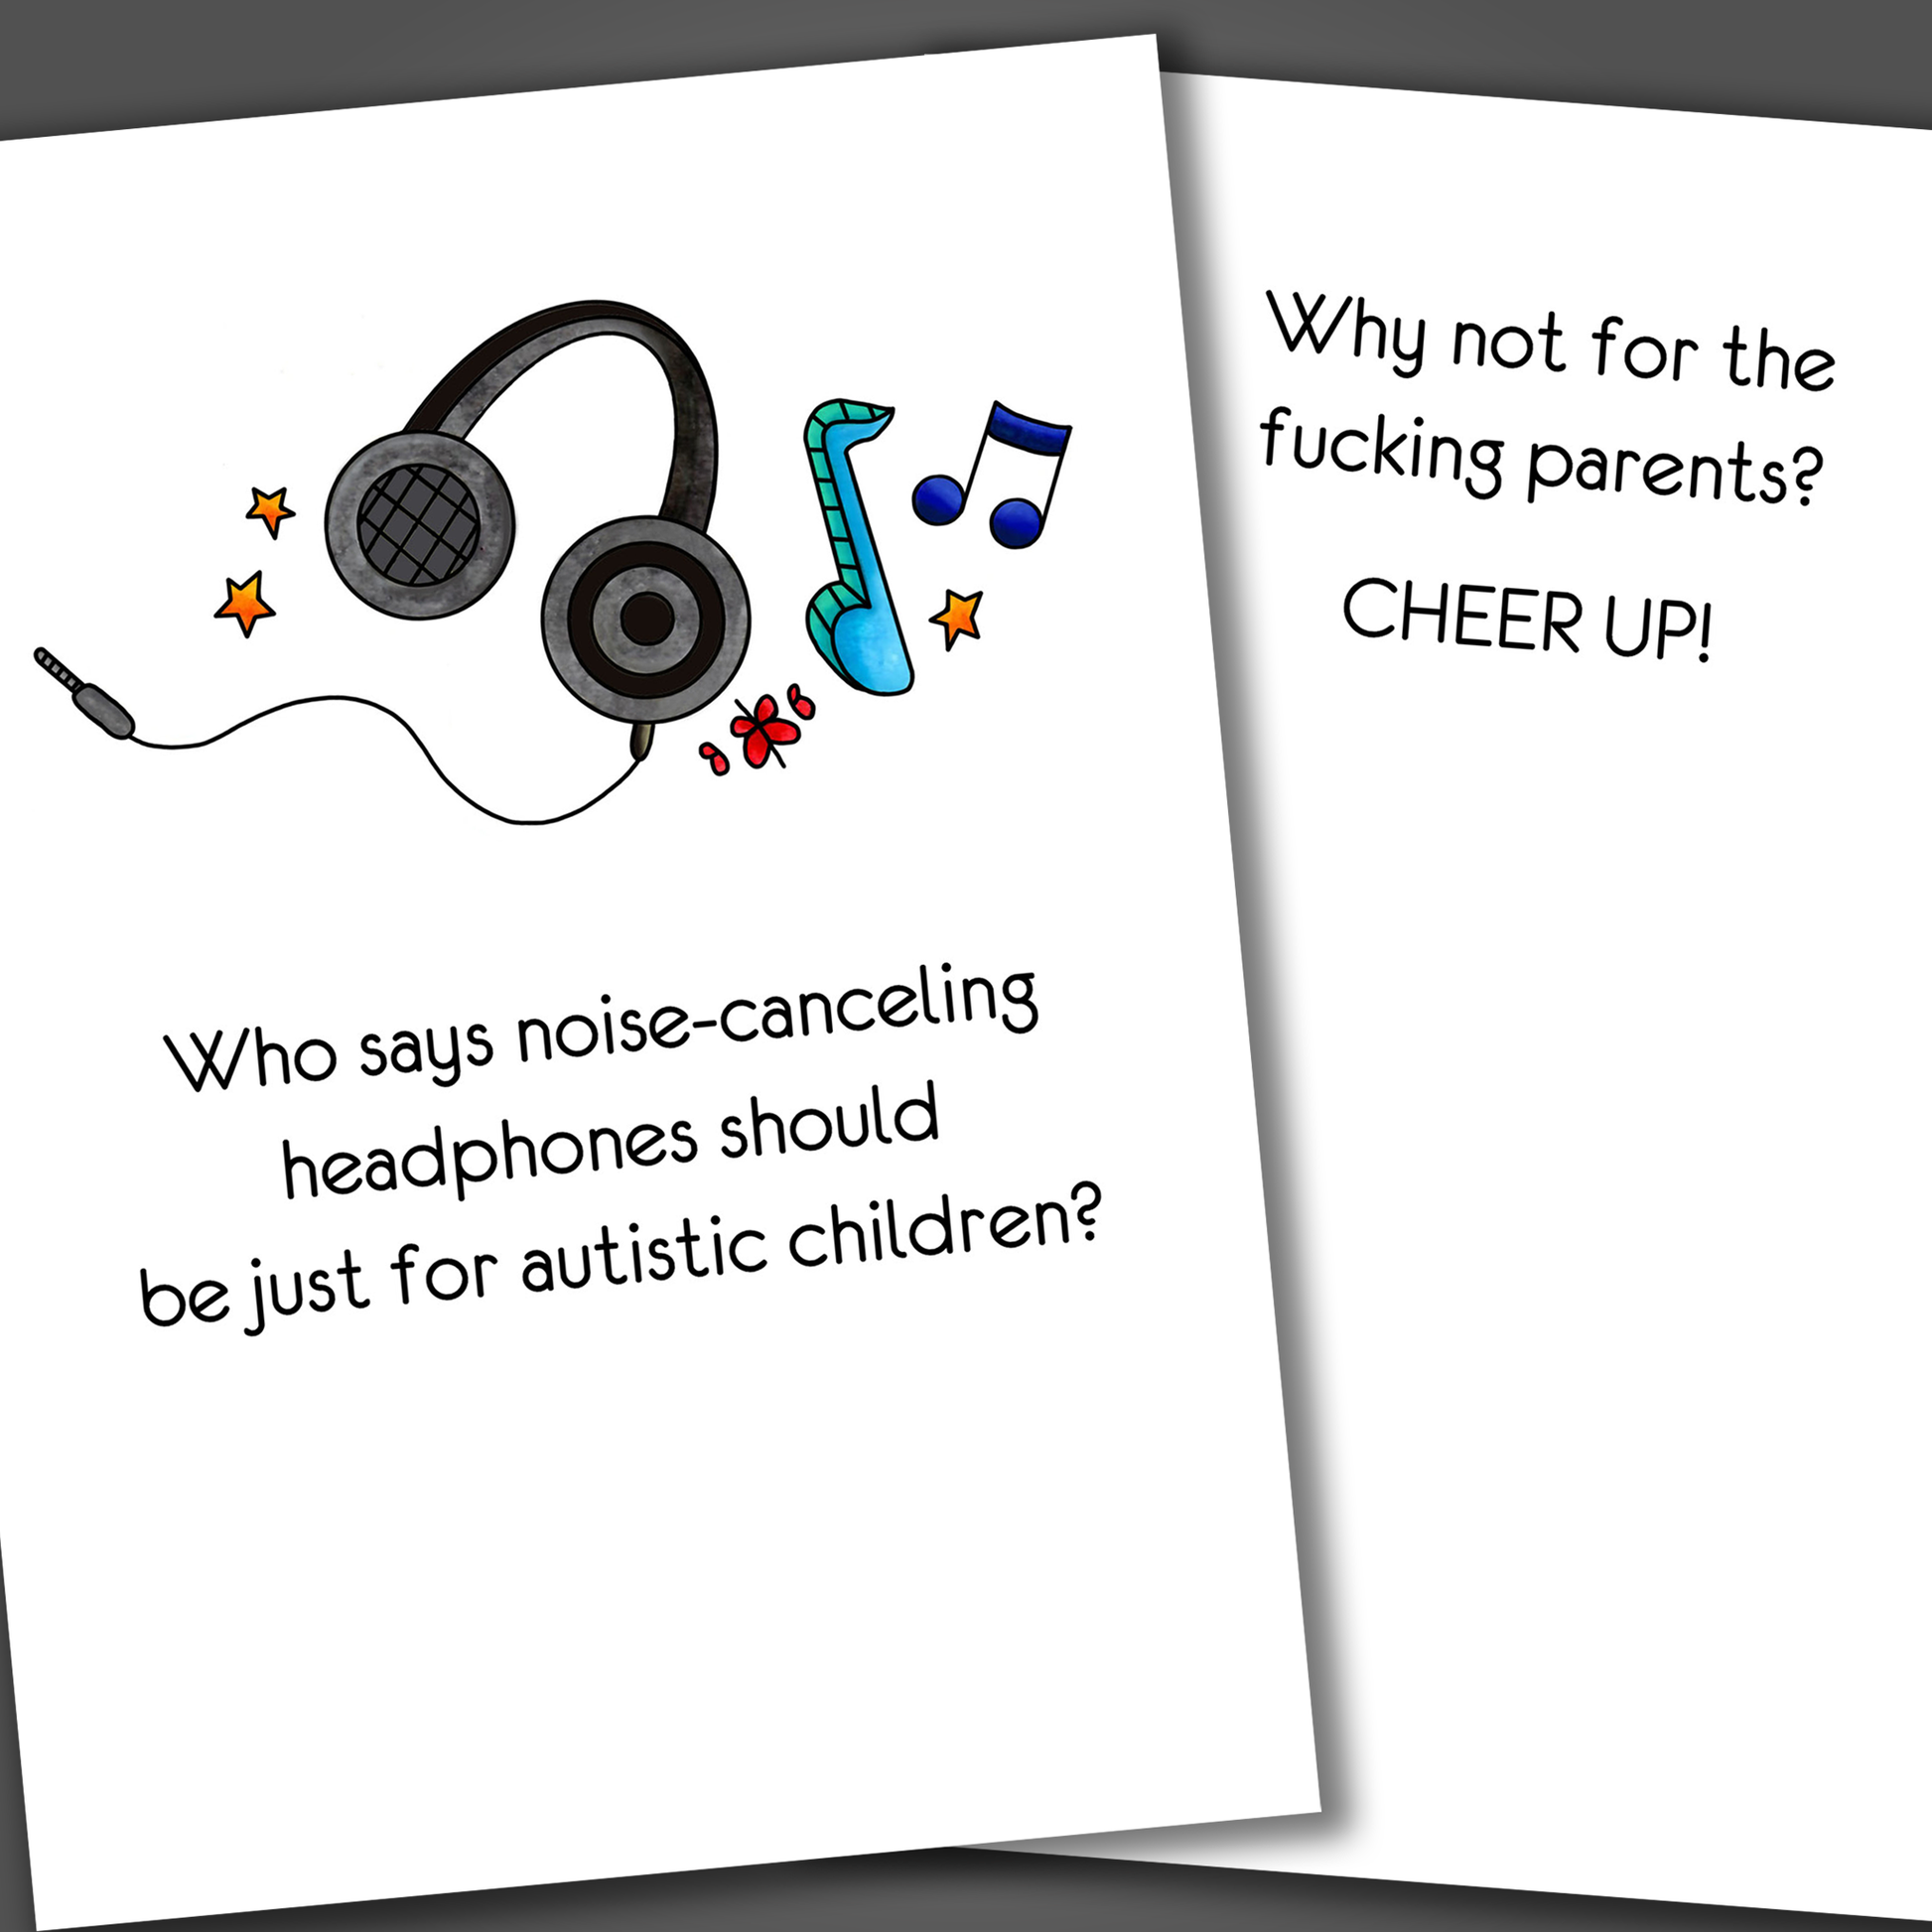 Funny cheer up card for special needs parents with a drawing of headphones on the front of the card. Inside the card is a funny joke that ends in cheer up!